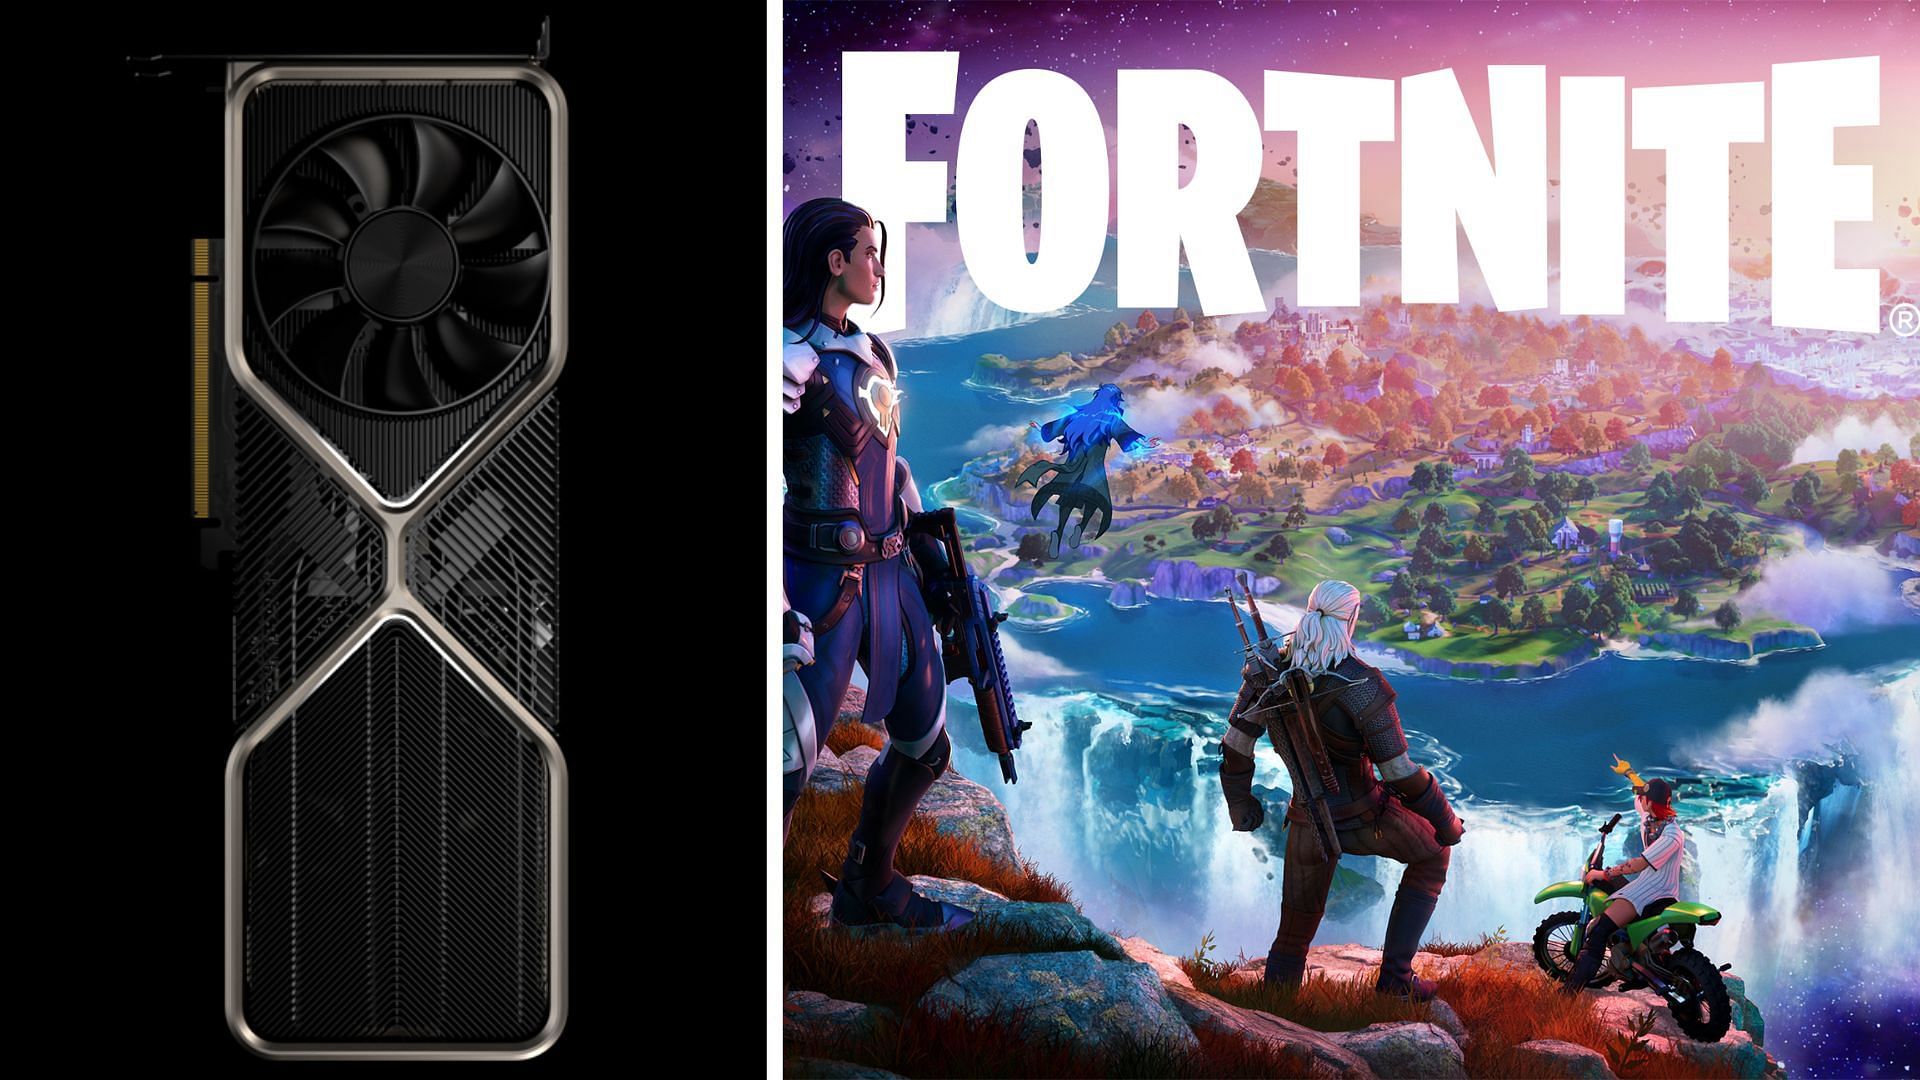 RTX 3080 FE and Fortnite cover